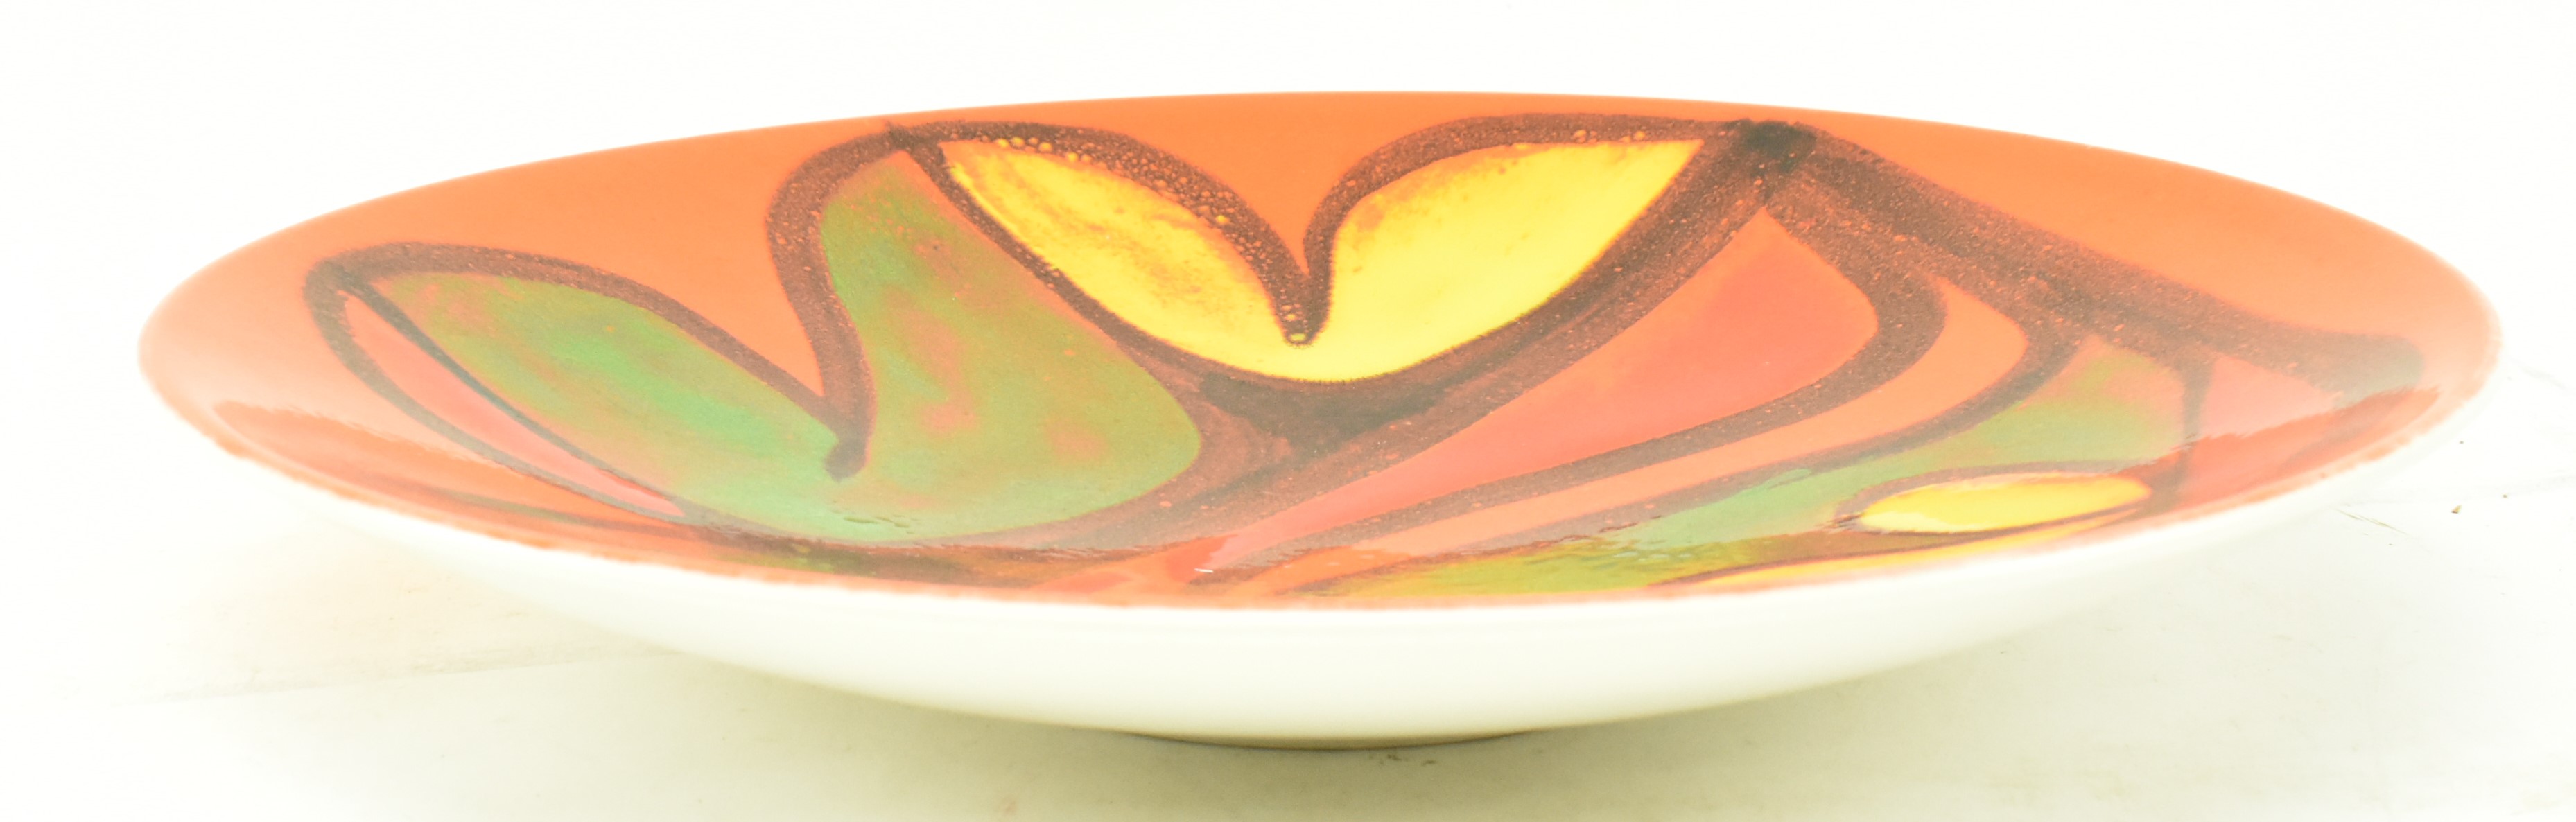 POOLE POTTERY - DELPHIS - STUDIO ART CHARGER PLATE - Image 5 of 5